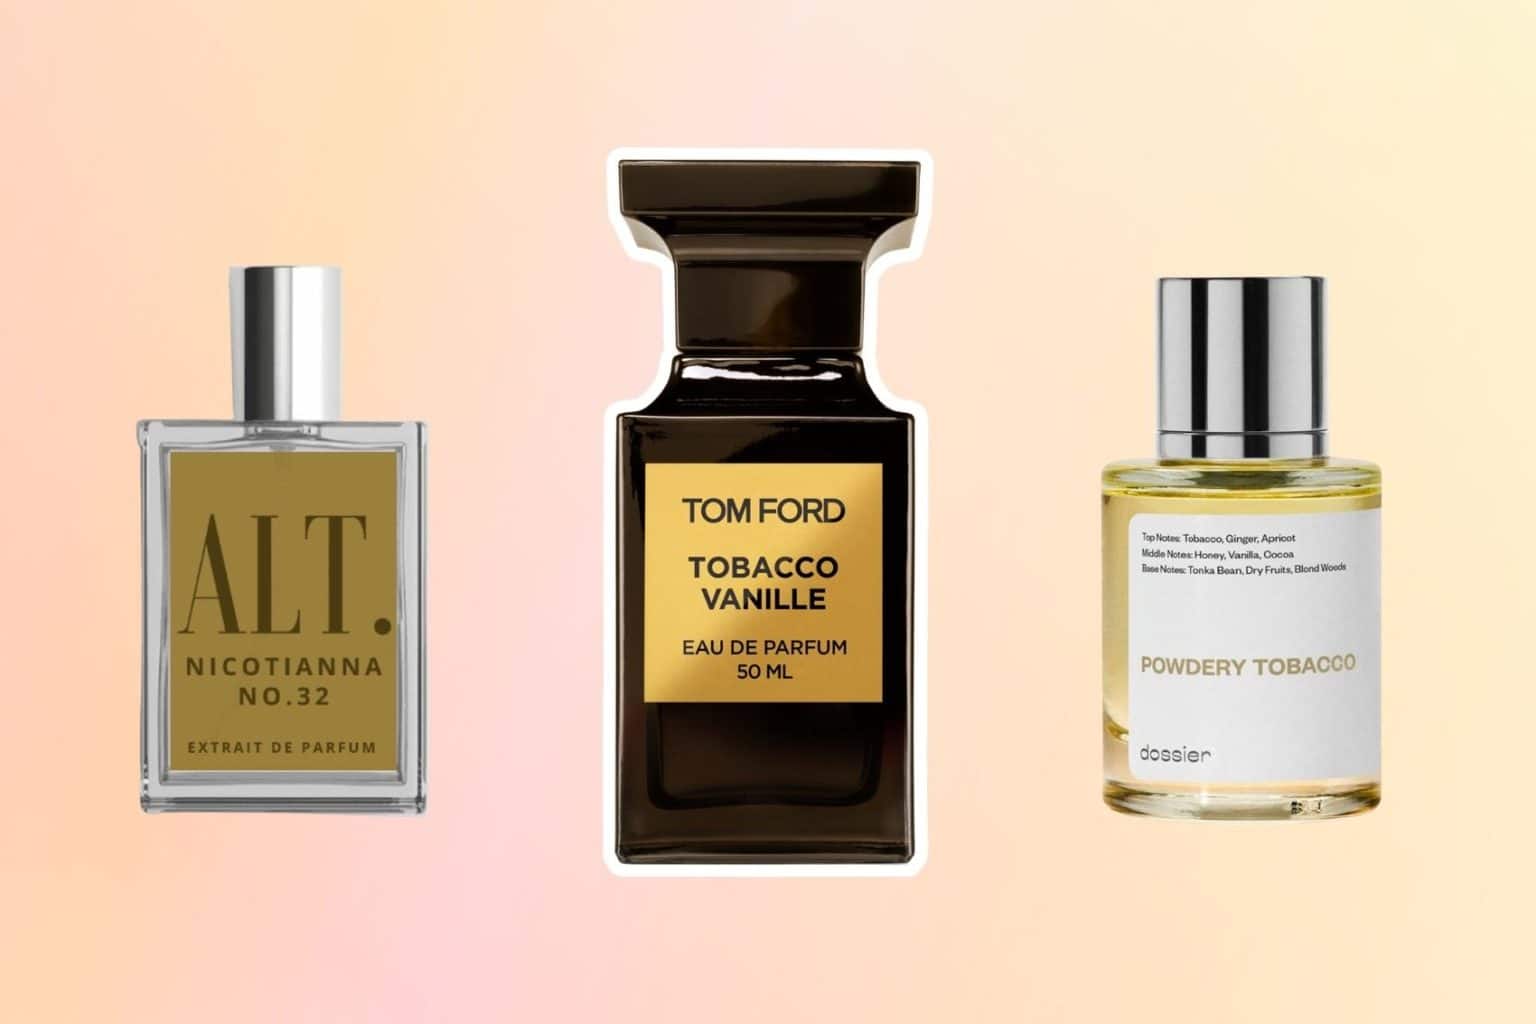 Perfume Dupes Similar To Tom Ford Tobacco Vanille - FragranceReview.com